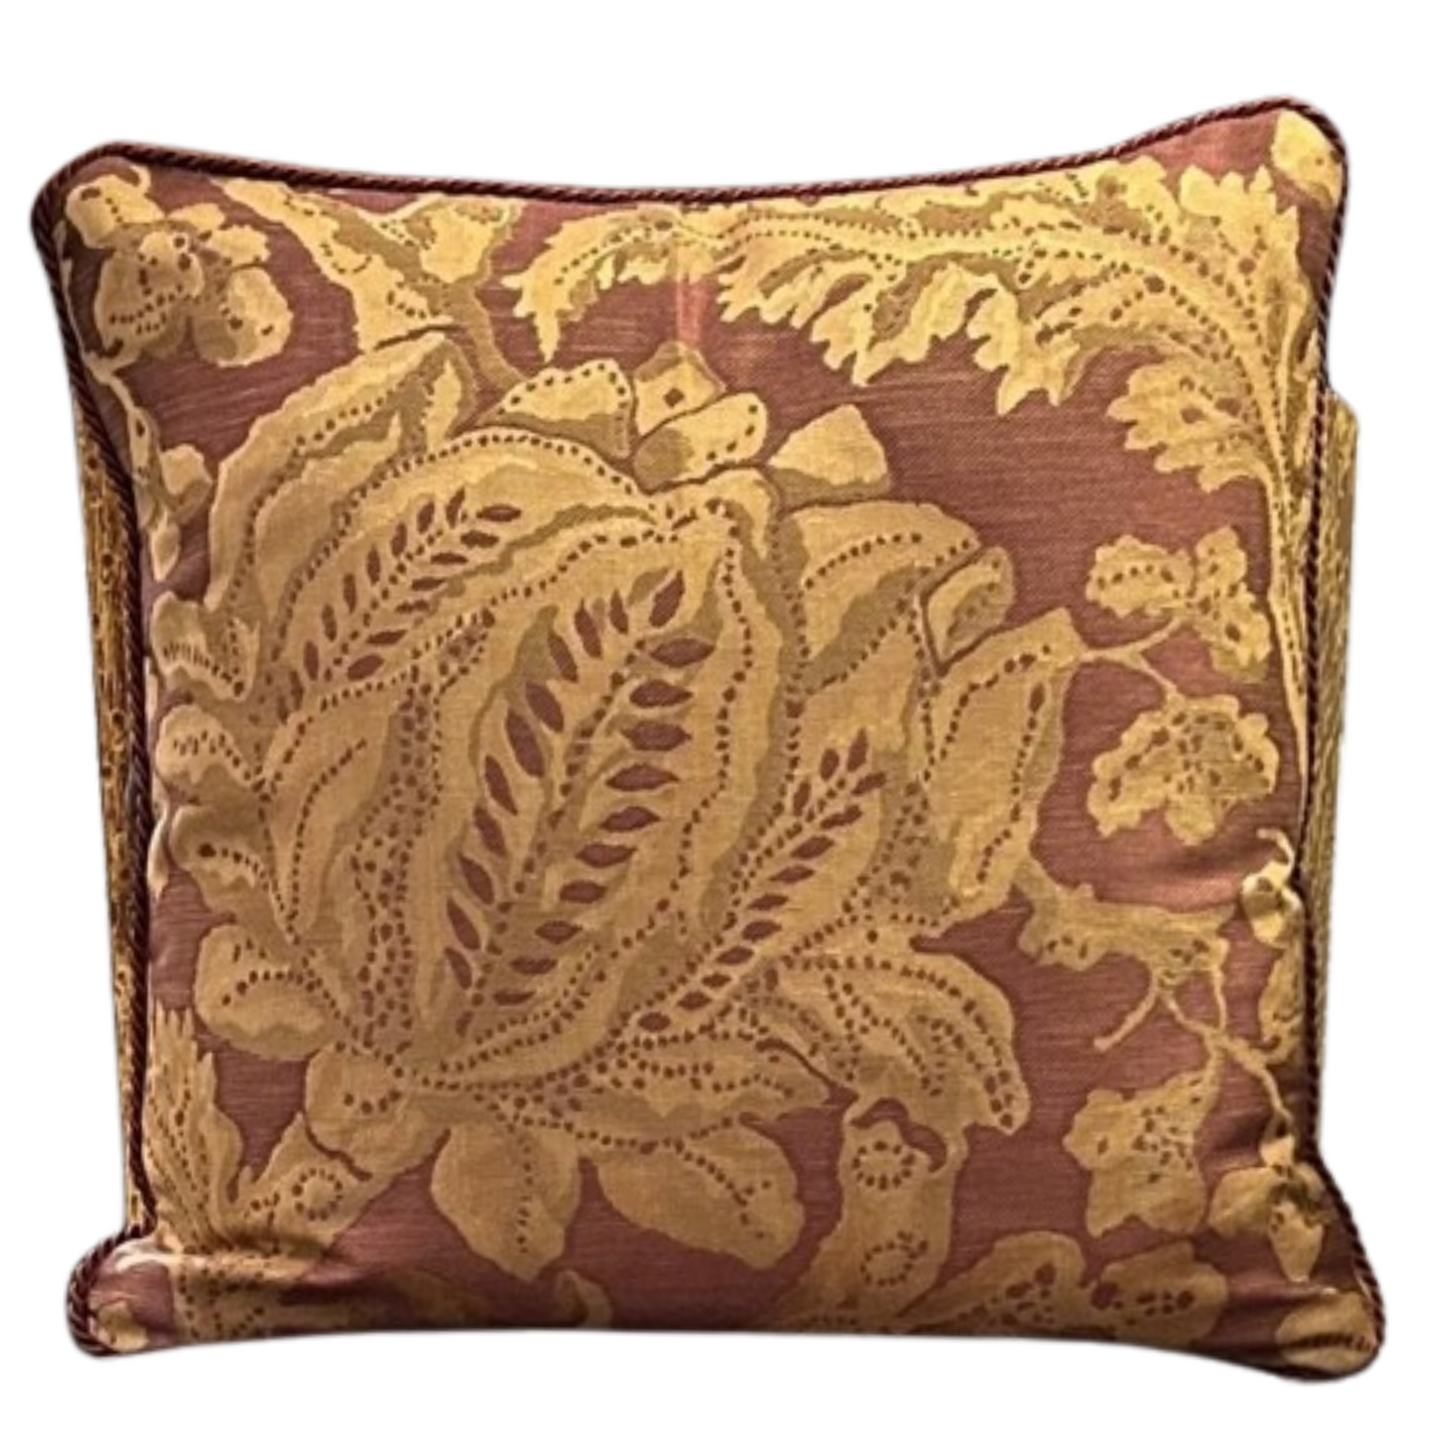 Zoffany Antique Damask  16 x 16 Designer Pillow with Down Feather Insert